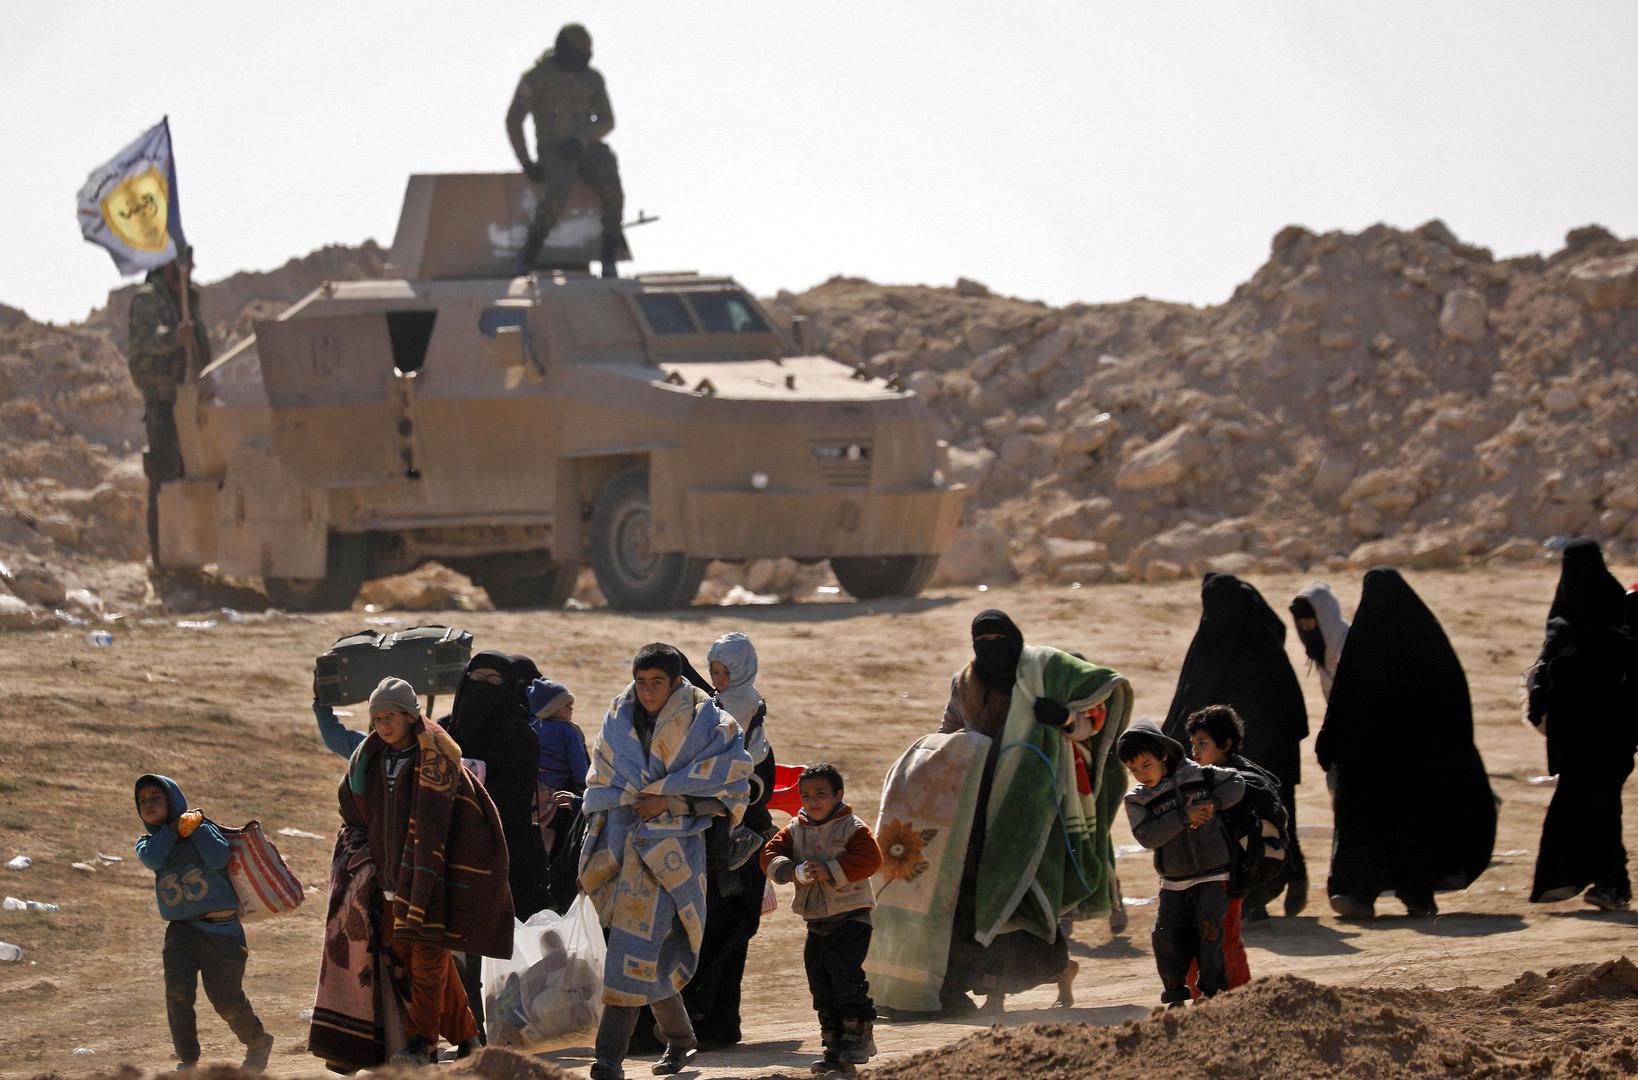 Civilians fleeing the battered ISIS-held holdout of Baghouz in the eastern Syrian province of Deir Ezzor walk past an armored vehicle belonging to the Manbij military council into a nearby area held by the Syrian Democratic Forces (SDF) on February 12, 20